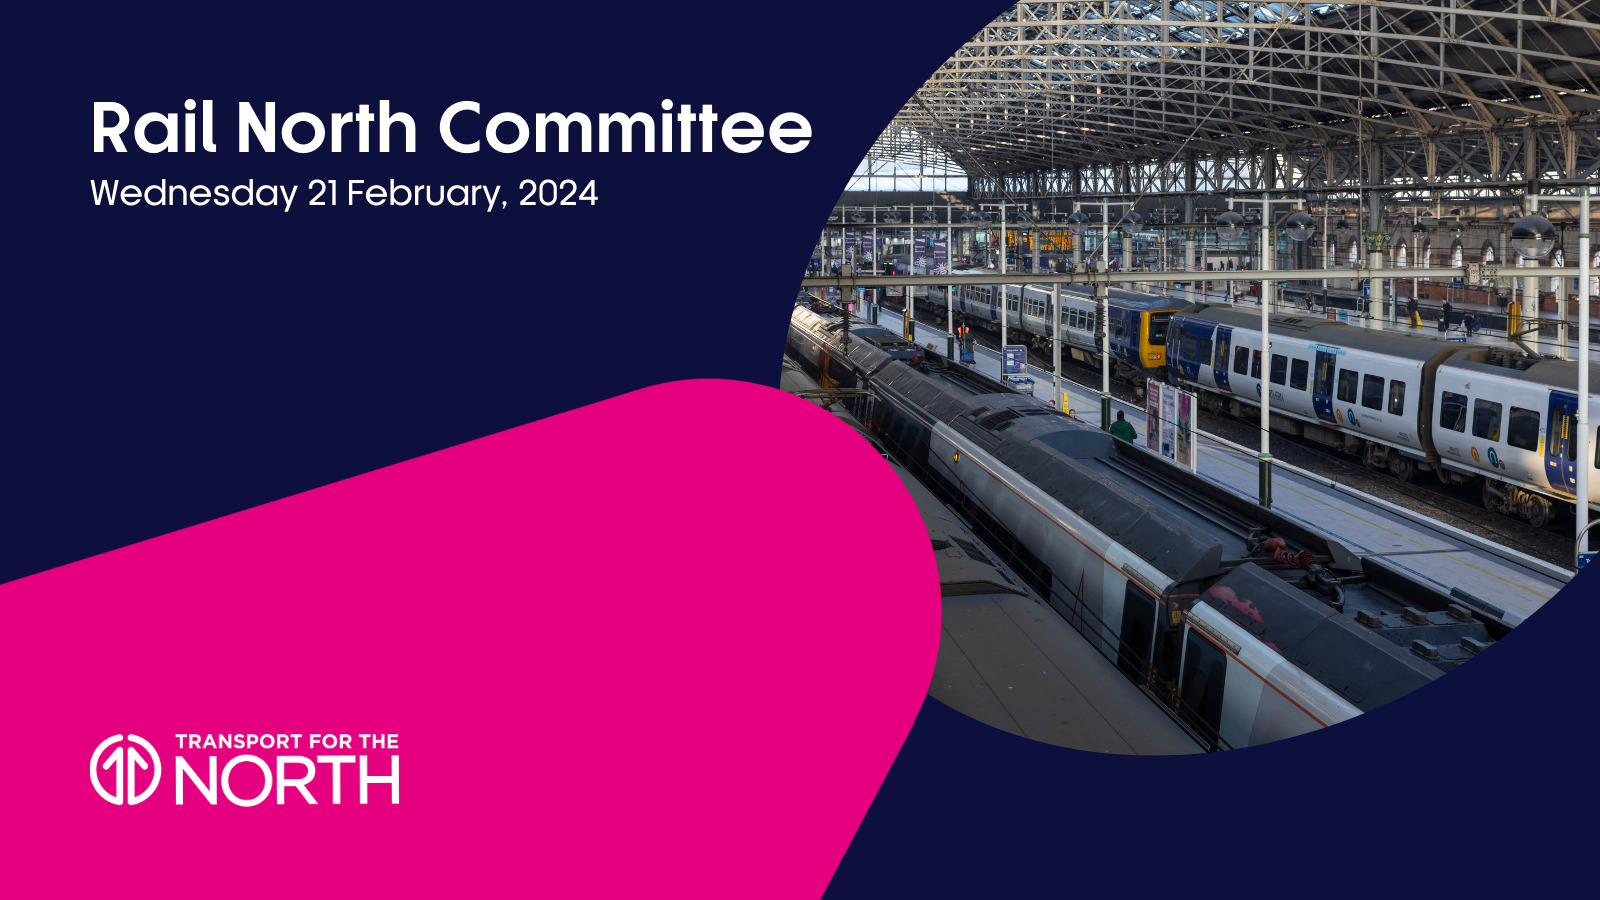  Search documents Watch meetings Agenda Agenda Consutation Call, Rail North Committee - Wednesday, 21st February, 2024 10.30 am